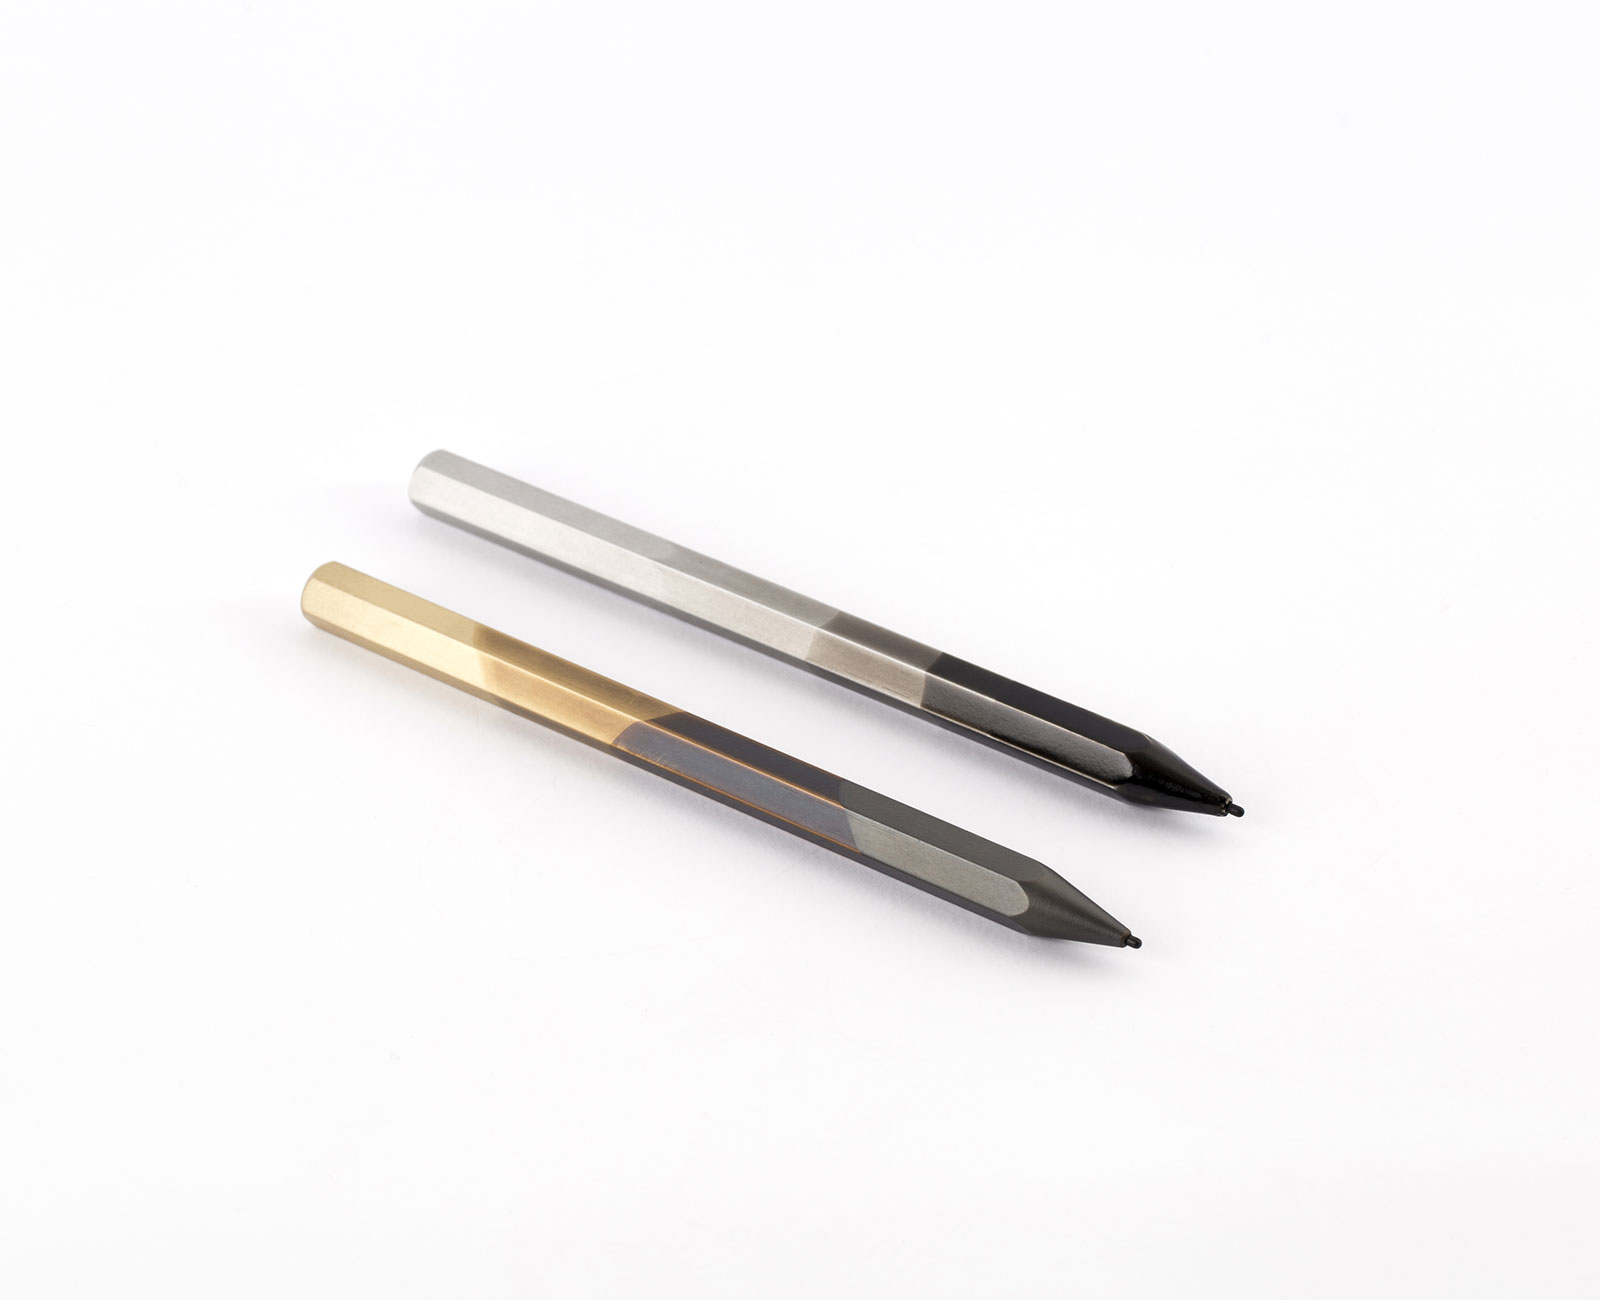 Soul_tech pens in two finishes